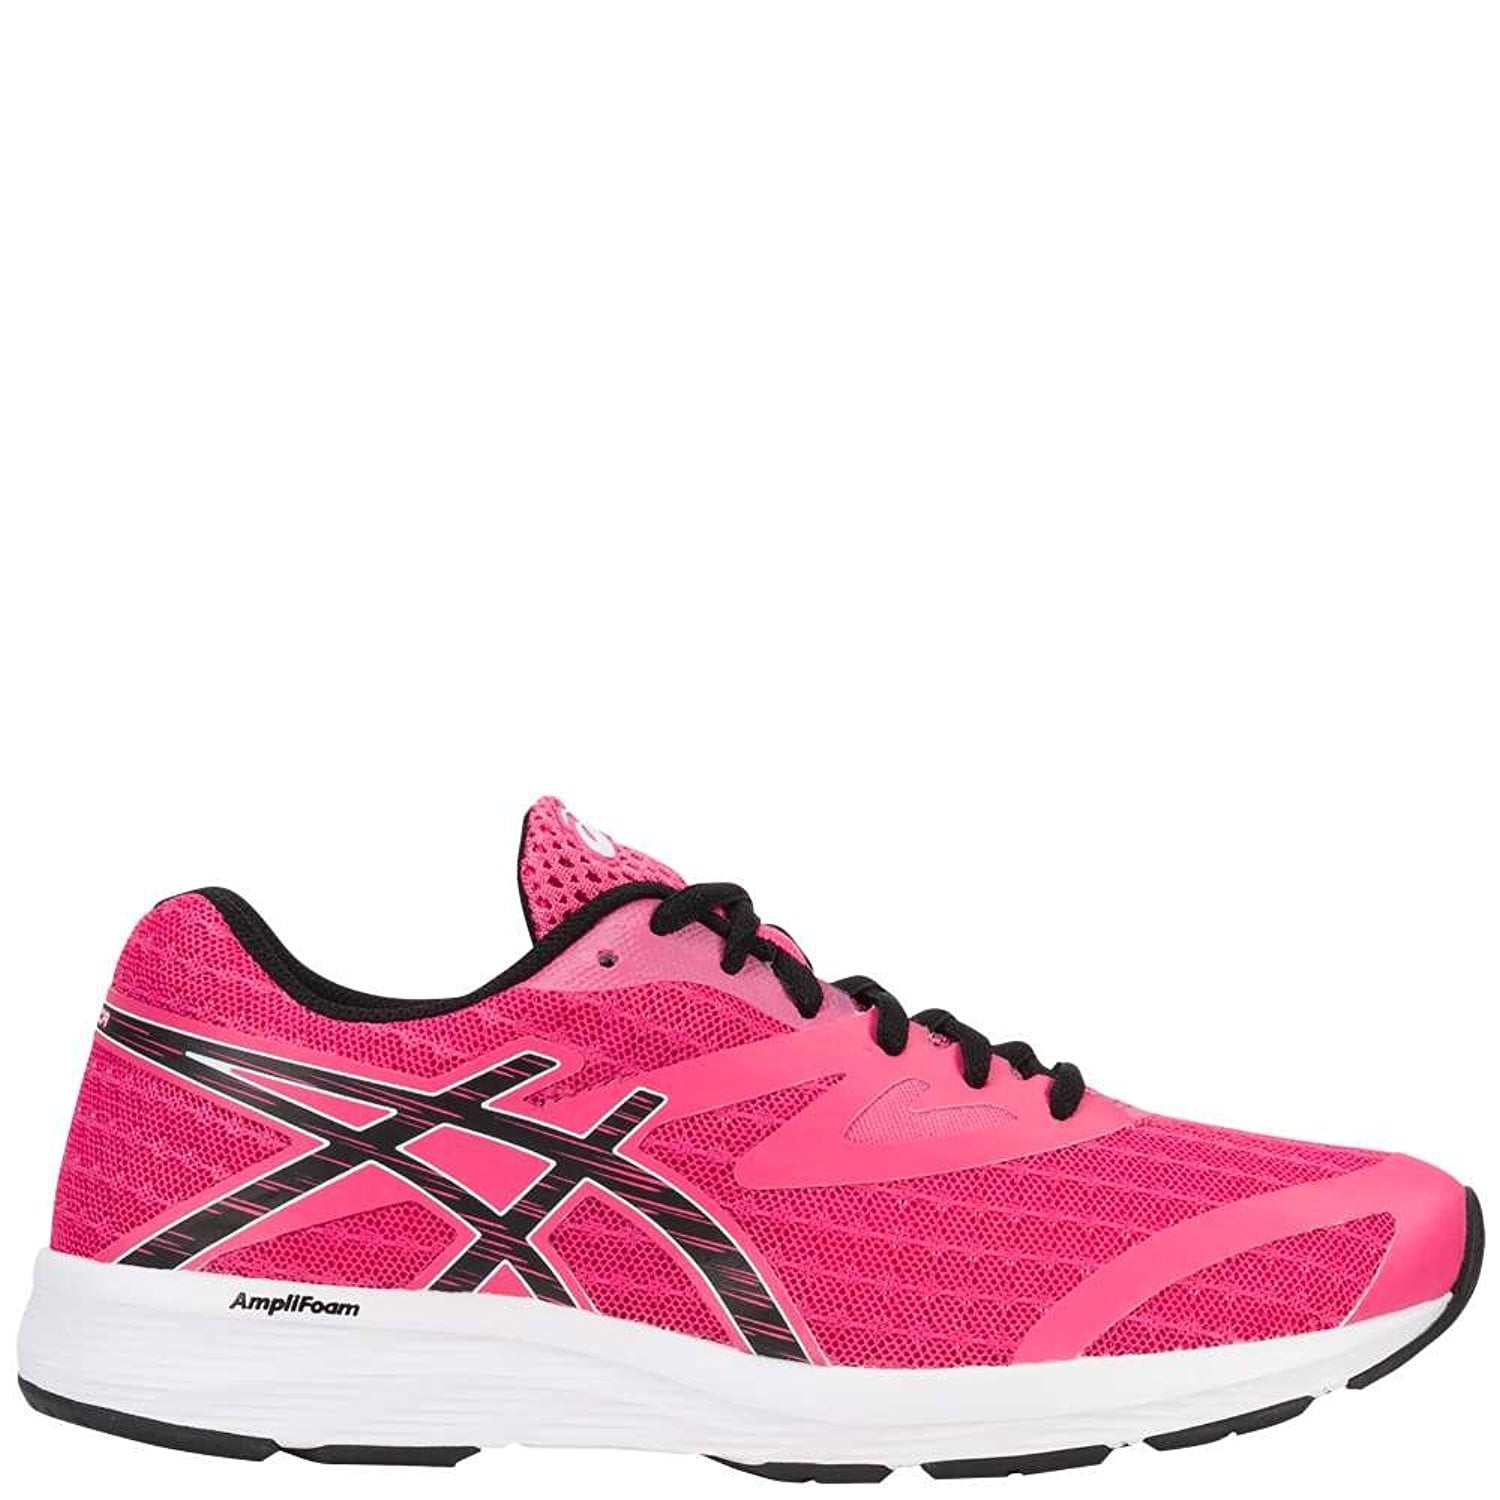 Exceder pasado radiador Asics Amplica Running Shoe | Our Editors Rounded Up the Year's Best Running  Shoes — Shop All 53 Pairs! | POPSUGAR Fitness Photo 14